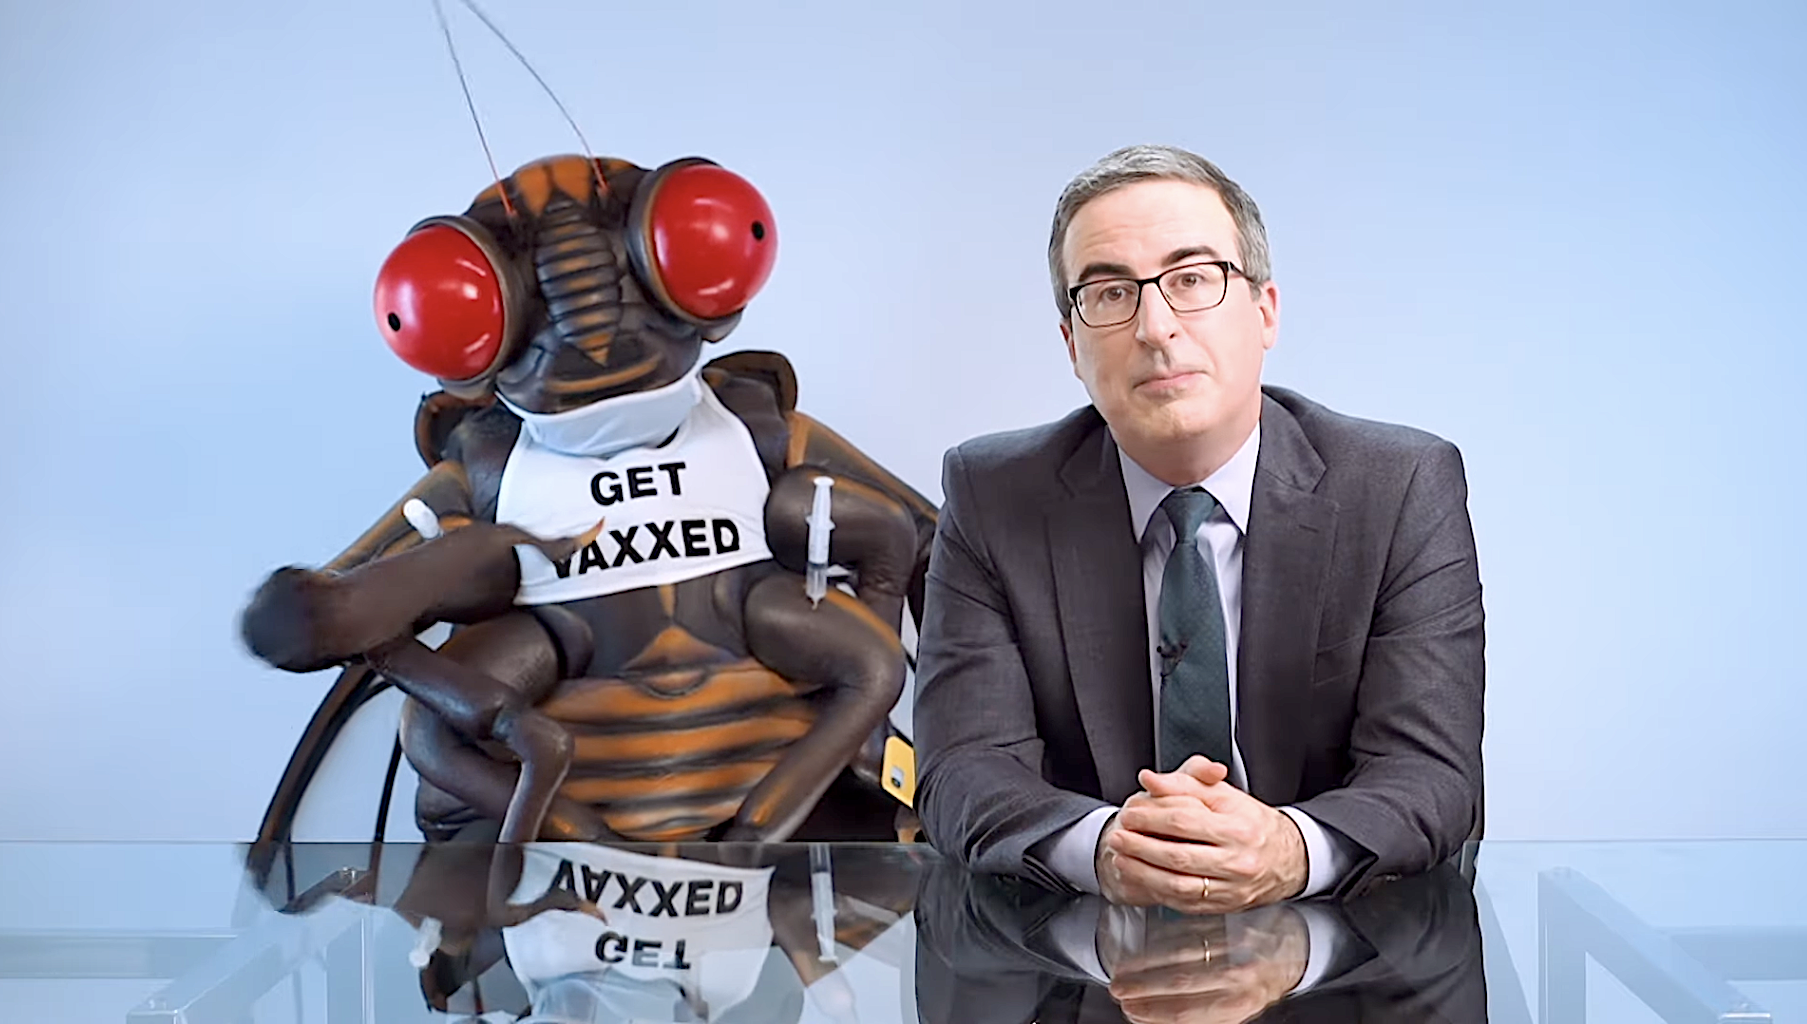 John Oliver on COVID-19 vaccines